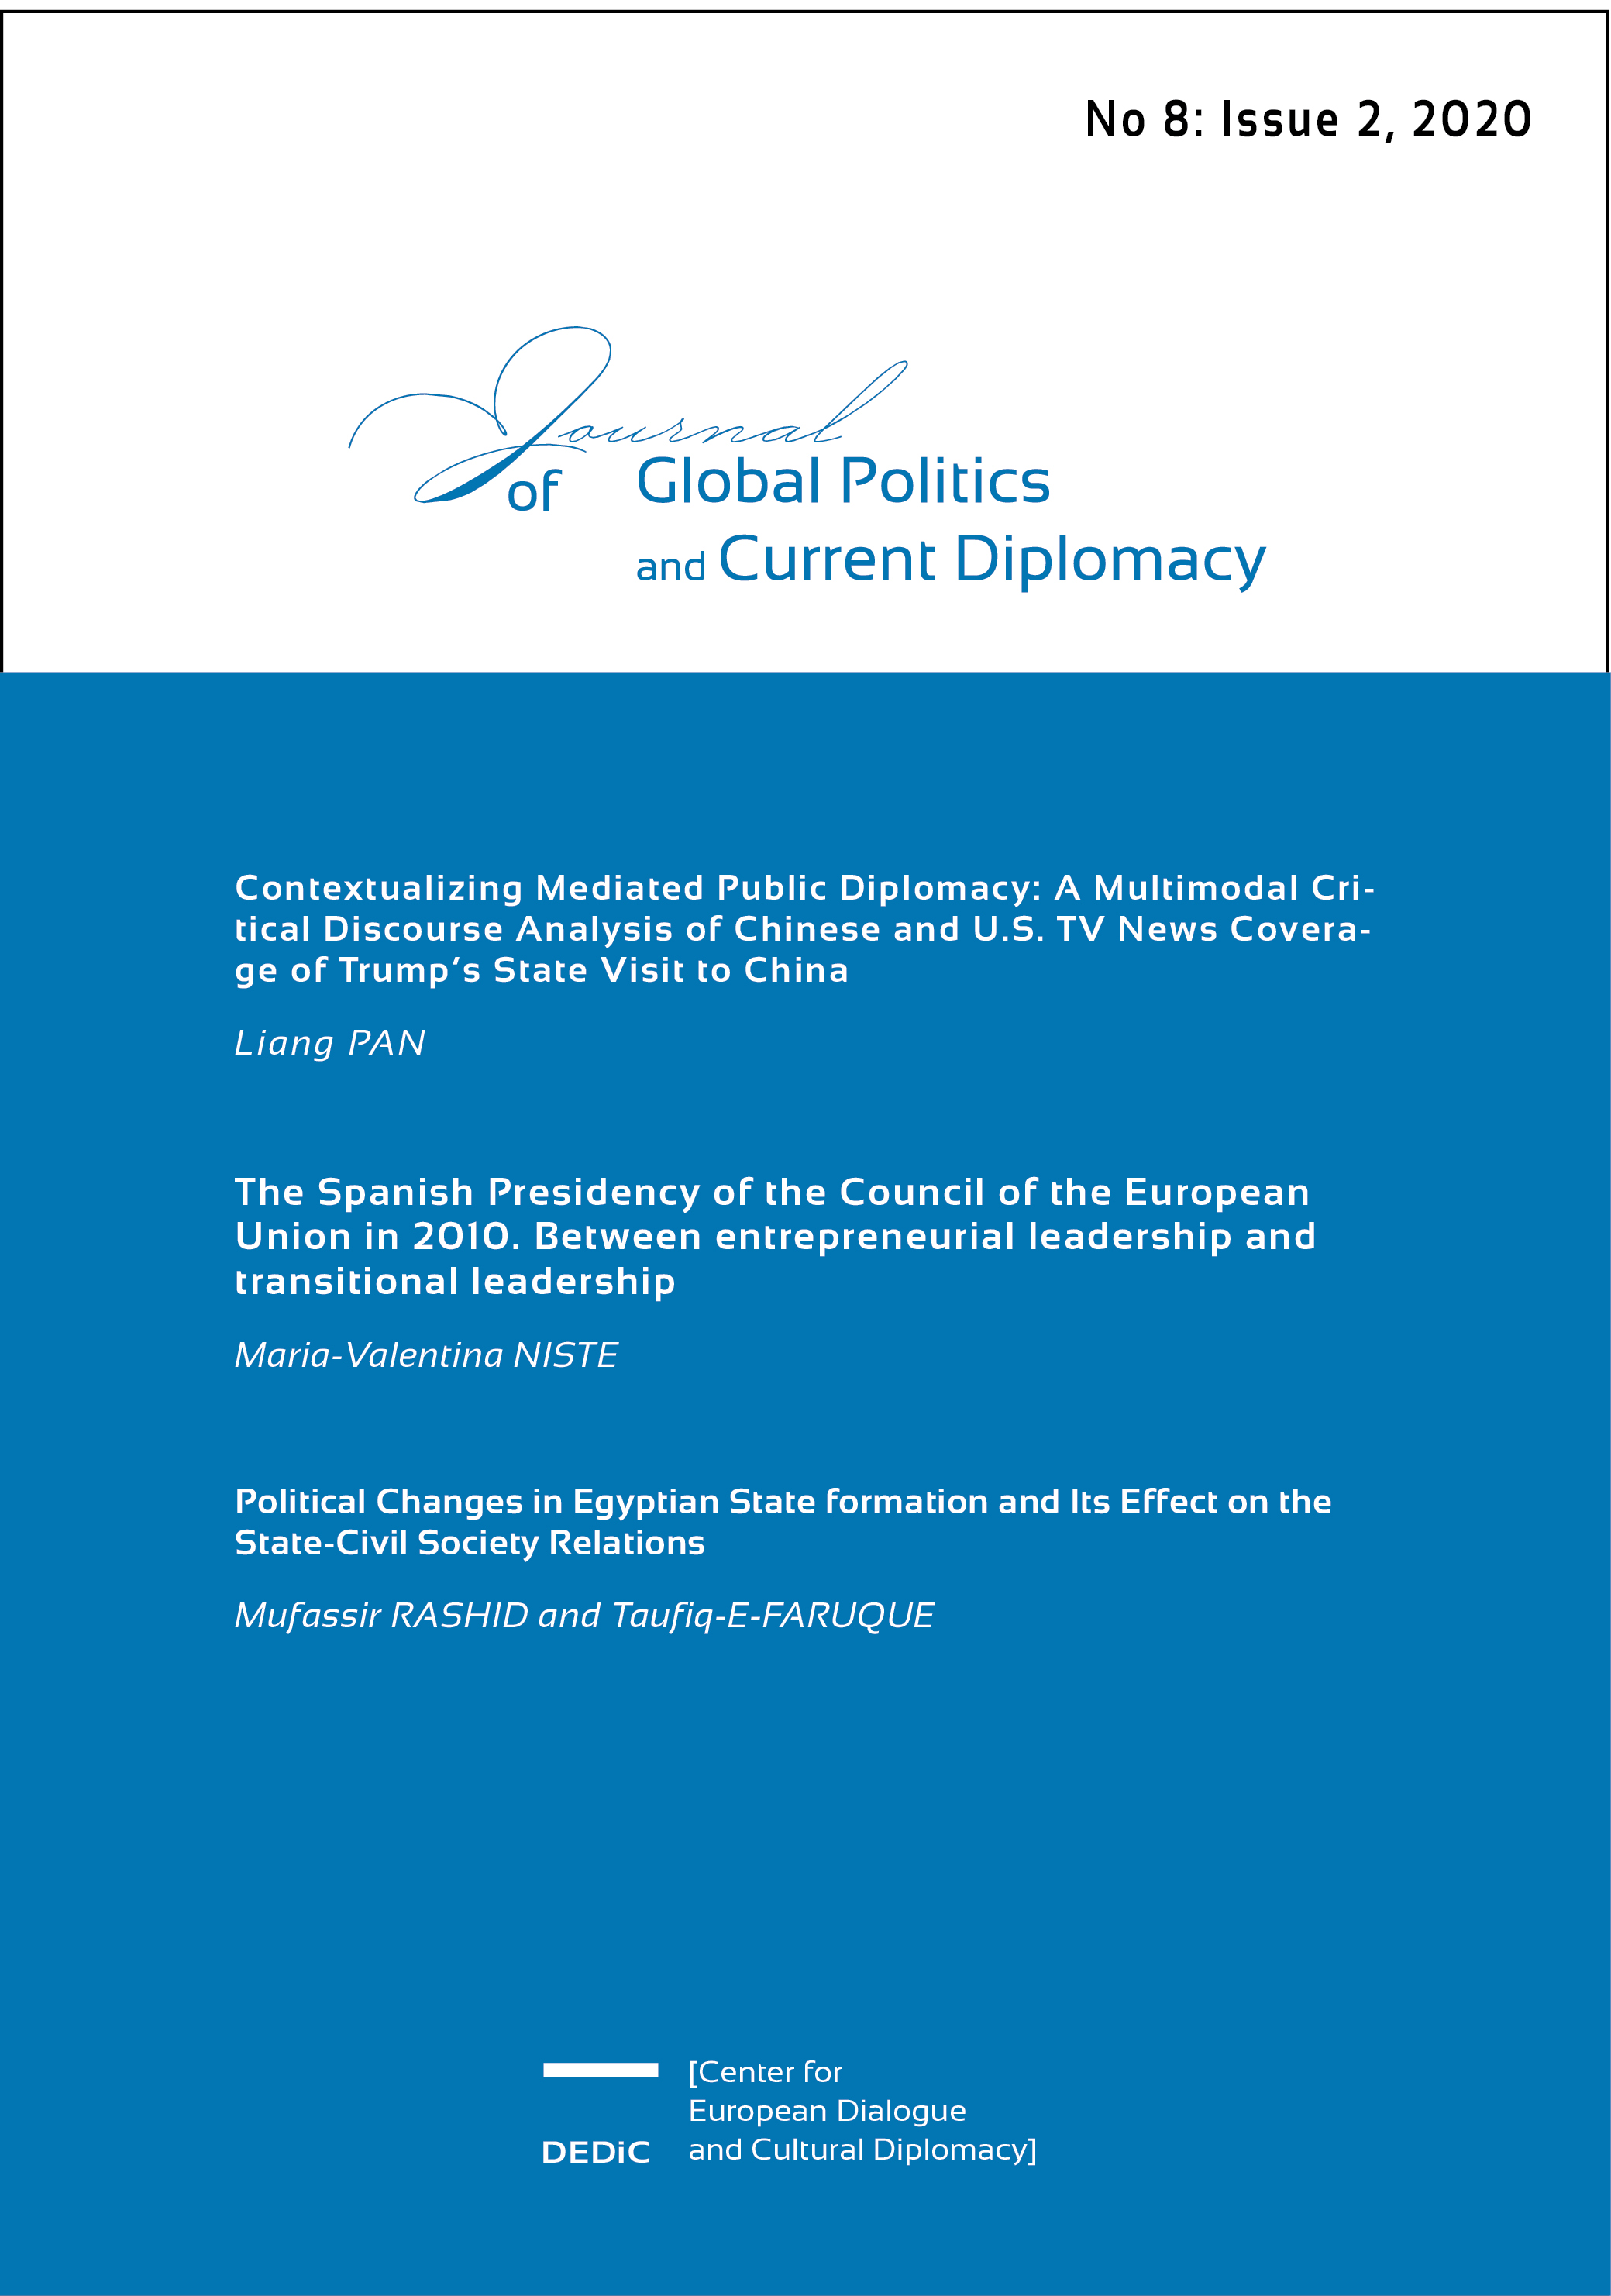 The Spanish Presidency of the Council of the European Union in 2010. Cover Image